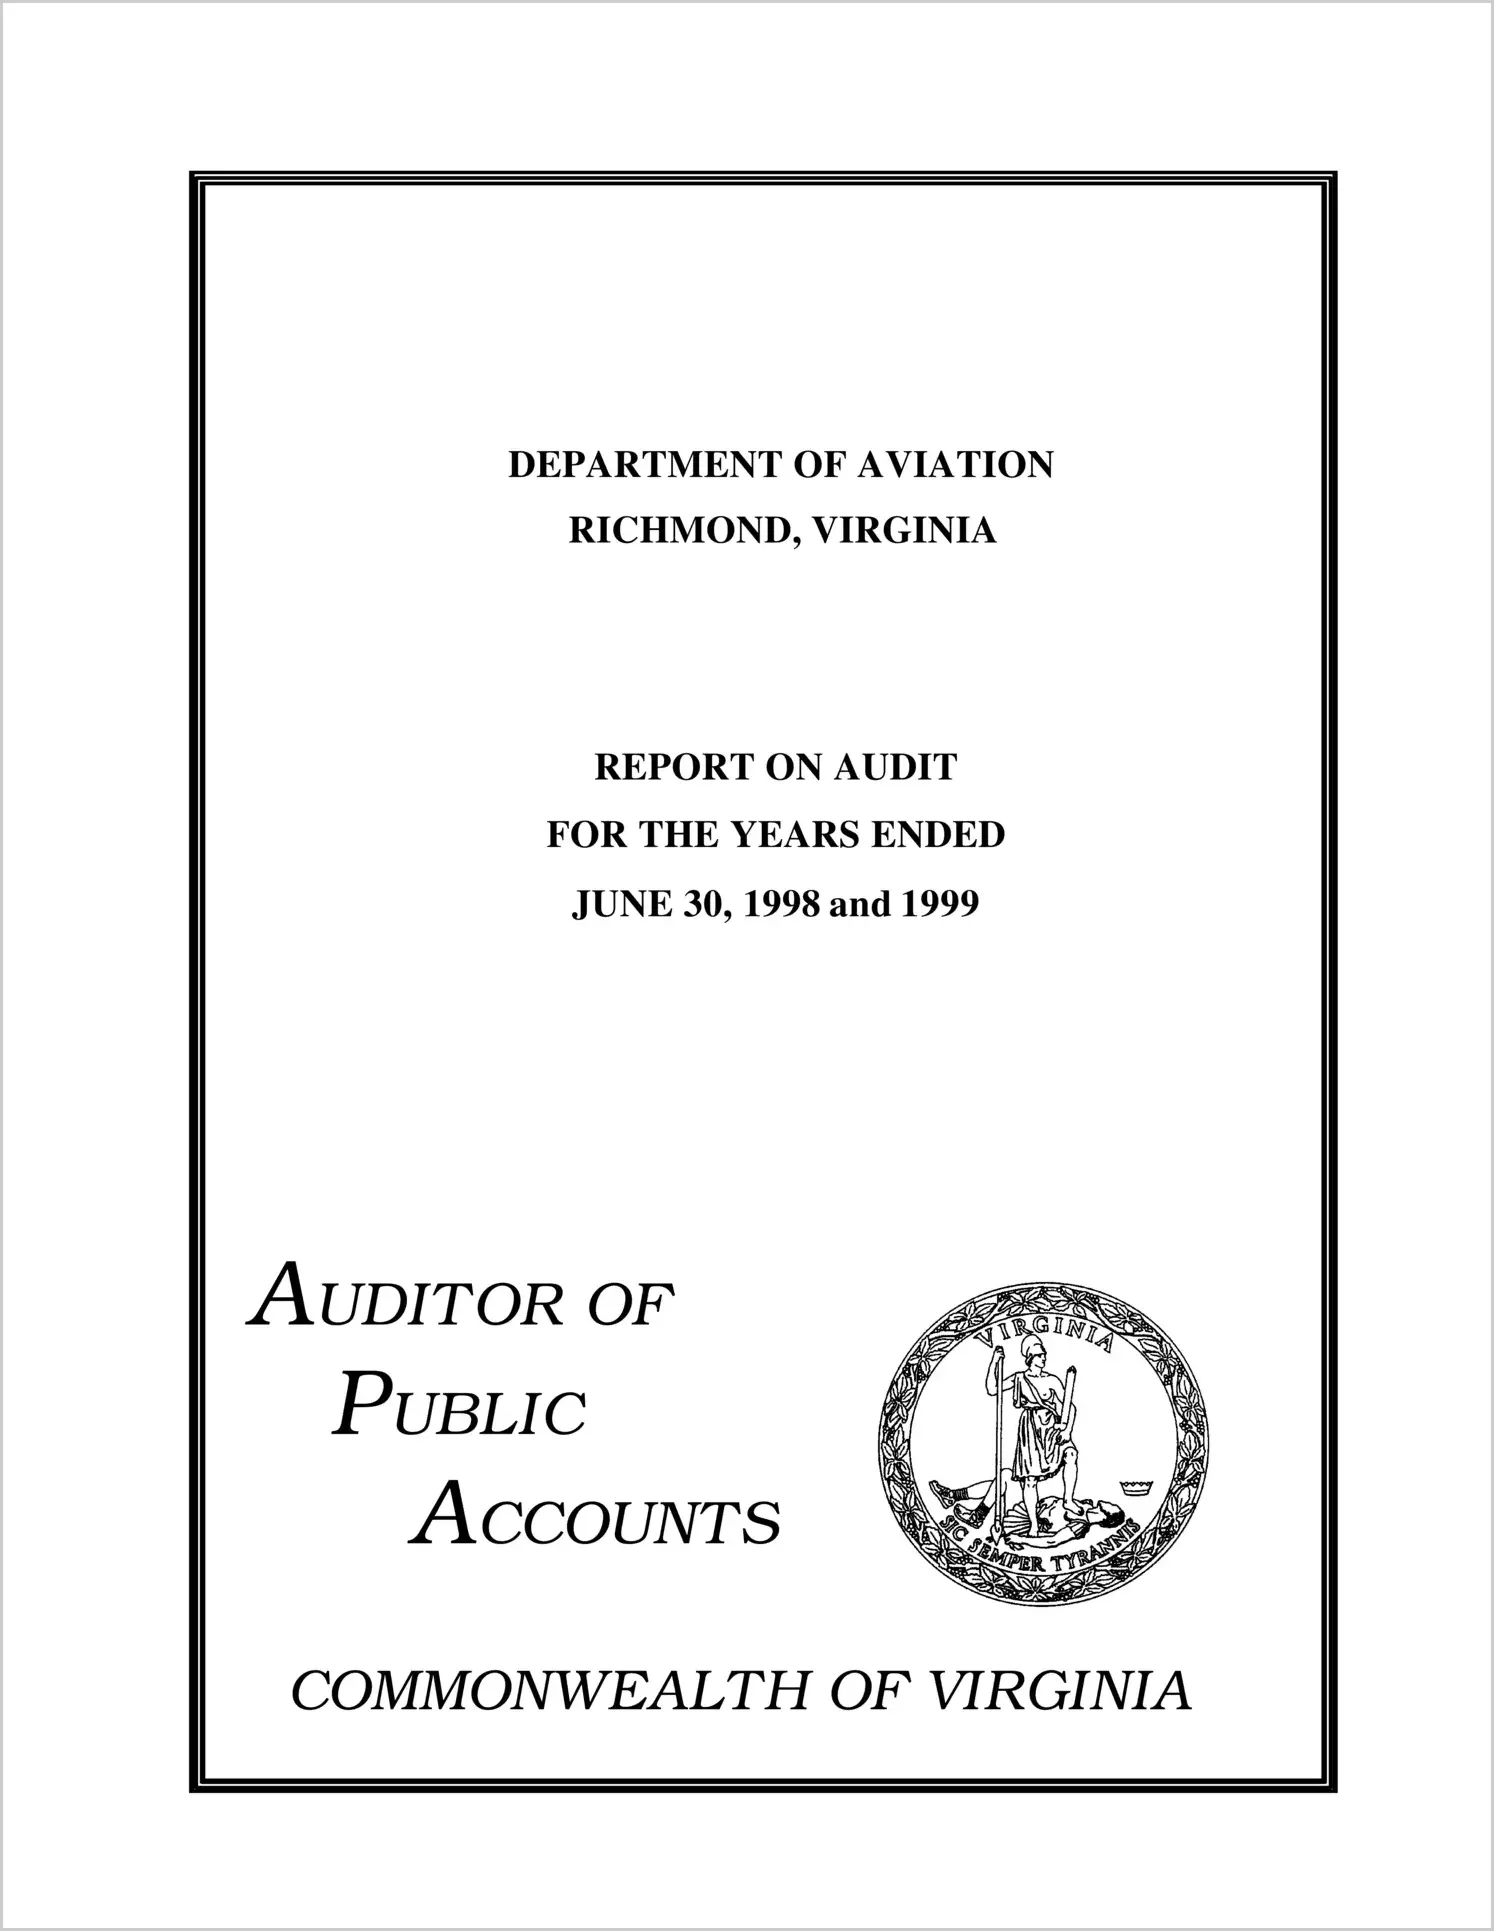 Department of Aviation for the years ended June 30, 1998 and 1999